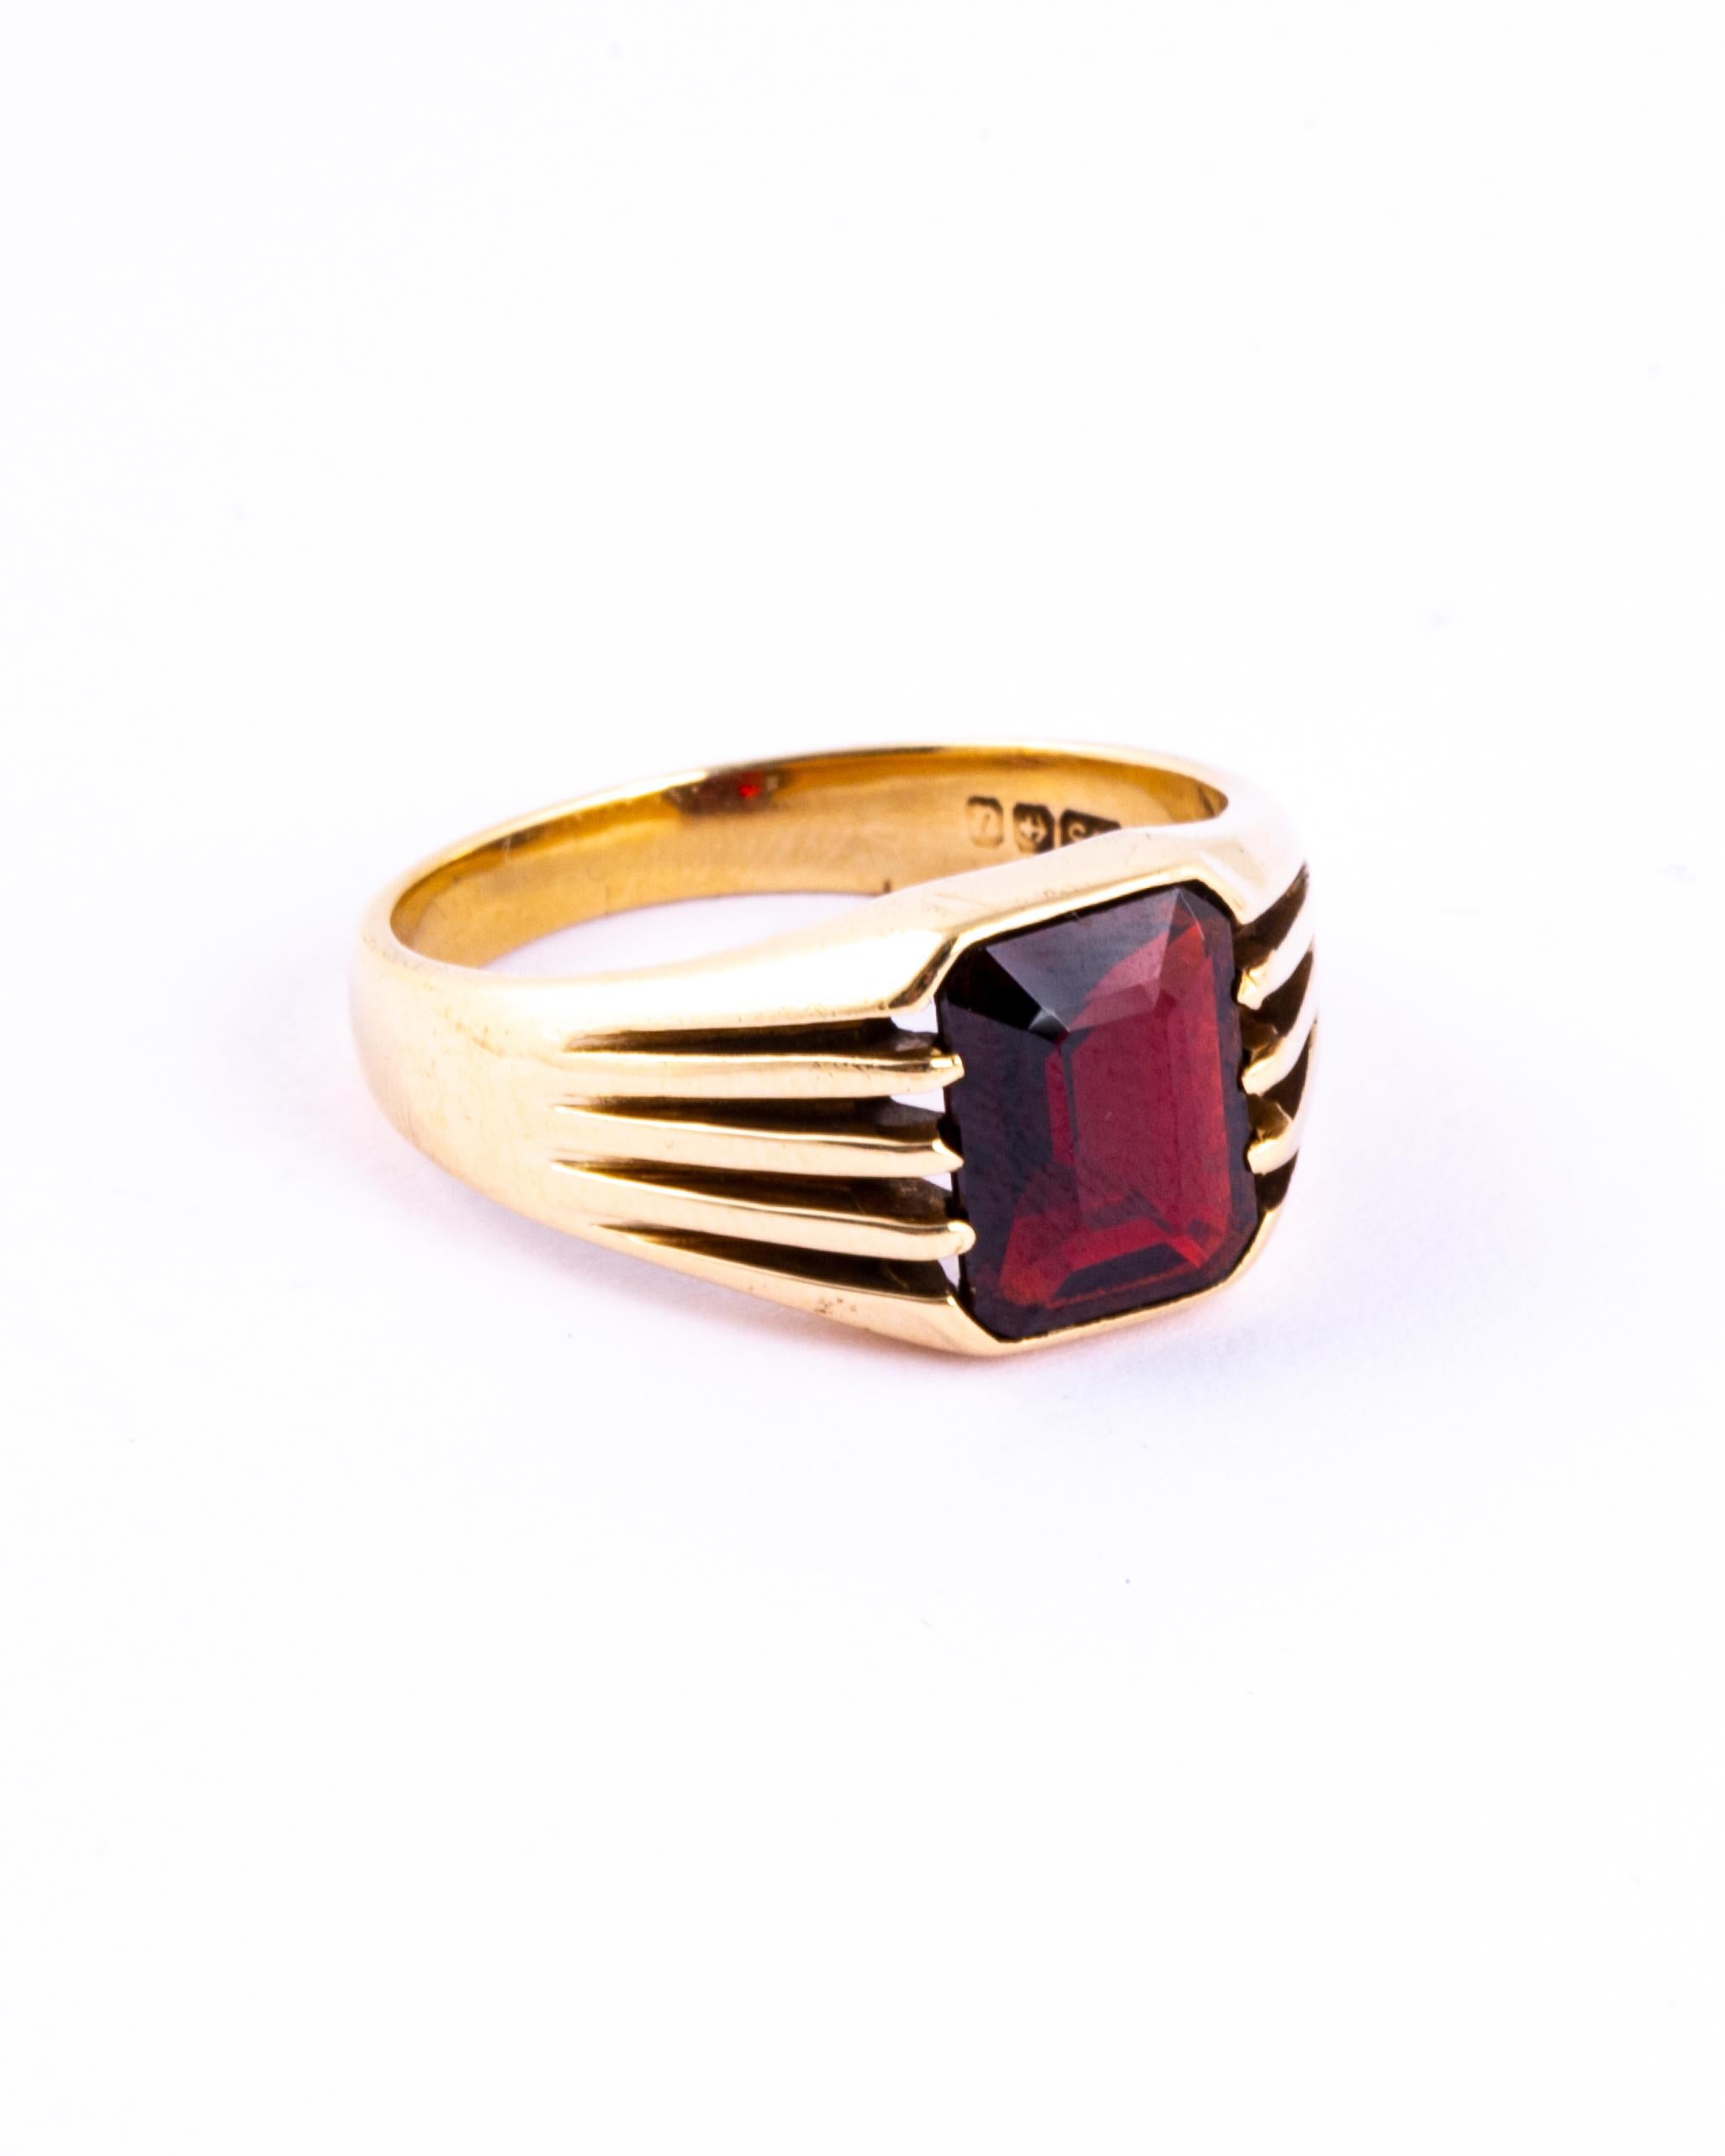 This simple style signet ring holds a garnet stone and the shoulders are made up of five strips of glossy gold. Made in Birmingham, England. 

Ring Size: P or 7 3/4
Stone Dimensions: 9x7mm

Weight: 5.5g